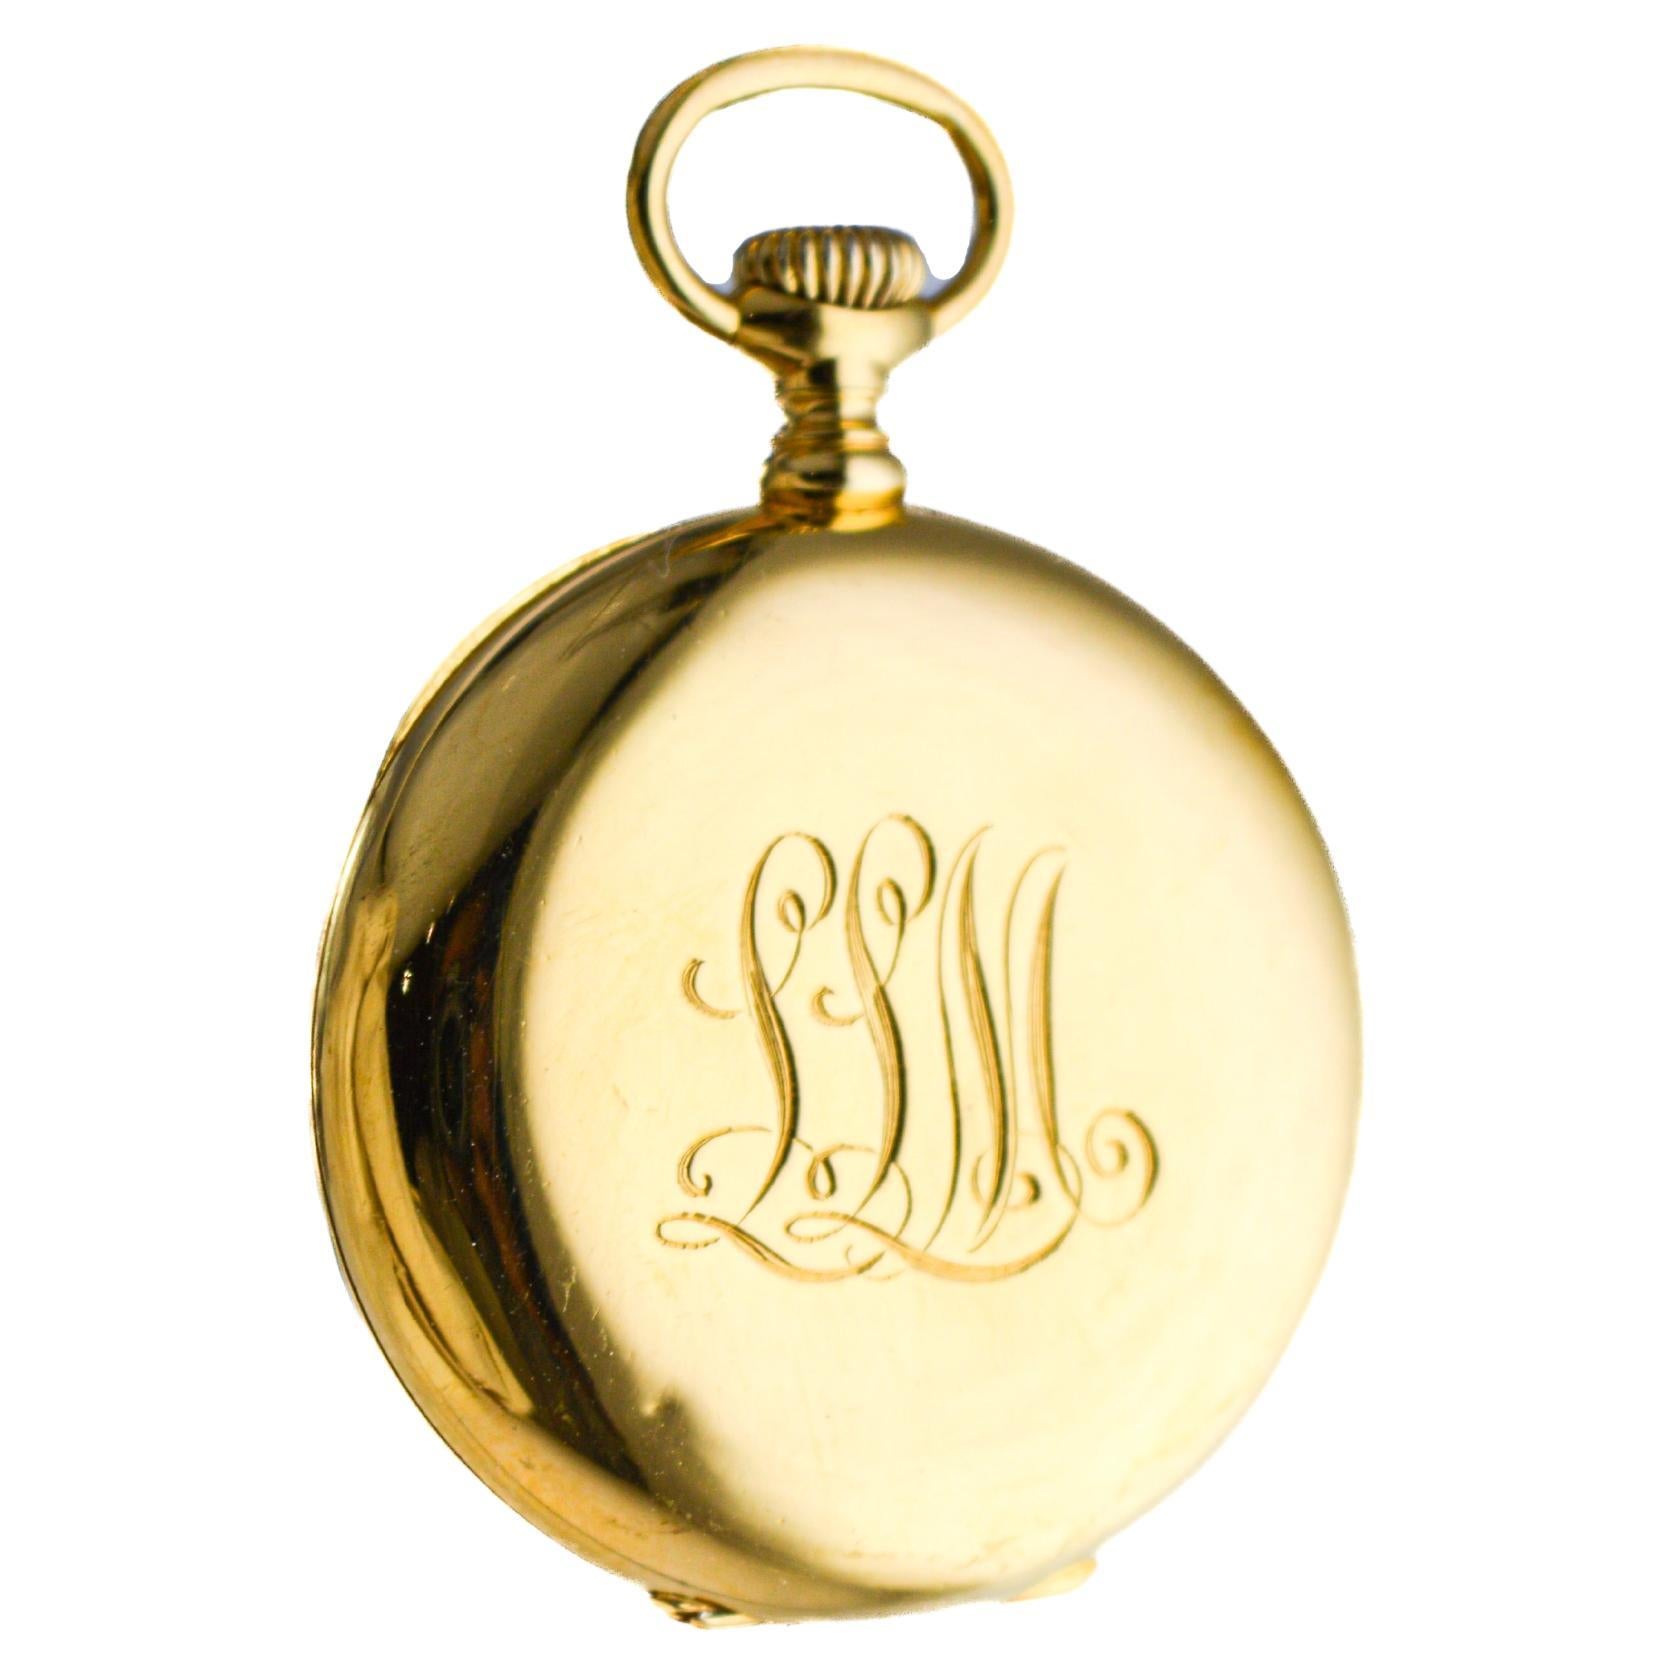 Tiffany & Co 18Kt Gold Pendant Watch with Gold Chain from 1912 Enamel Dial For Sale 4